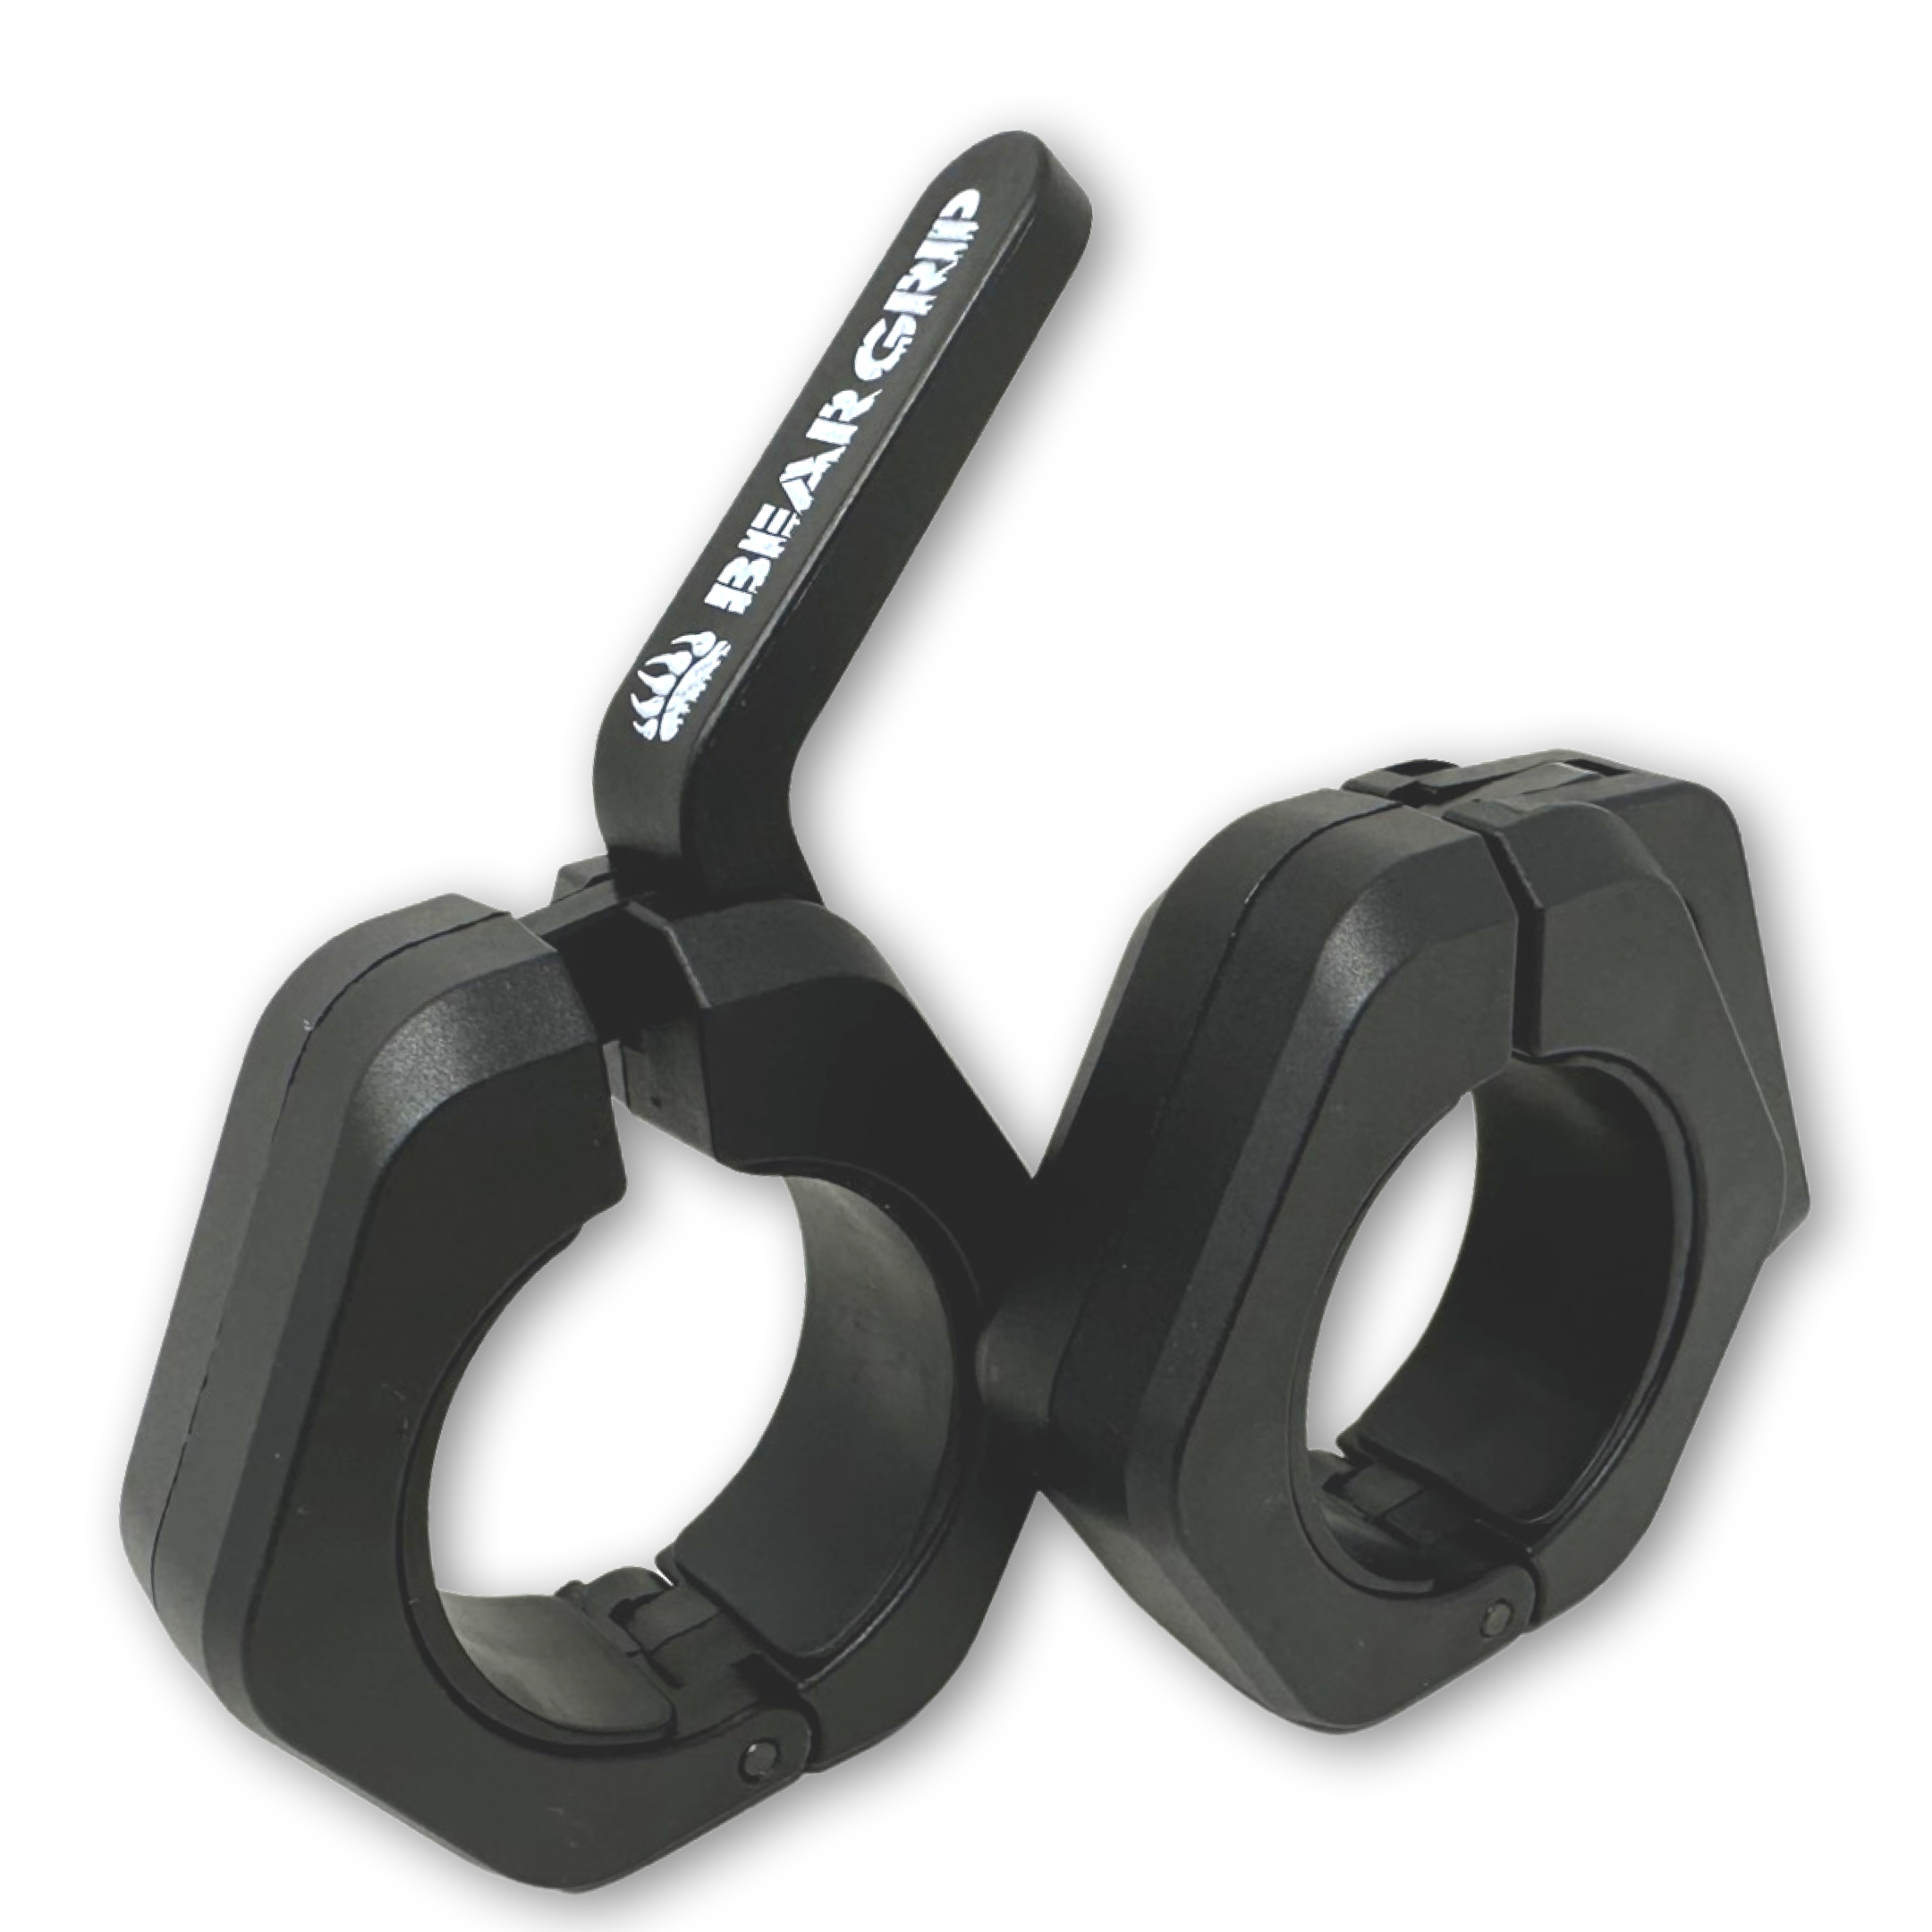 BEAR GRIP - Olympic Barbell Clamps Collars Clip (Pair) for Weight Lifting